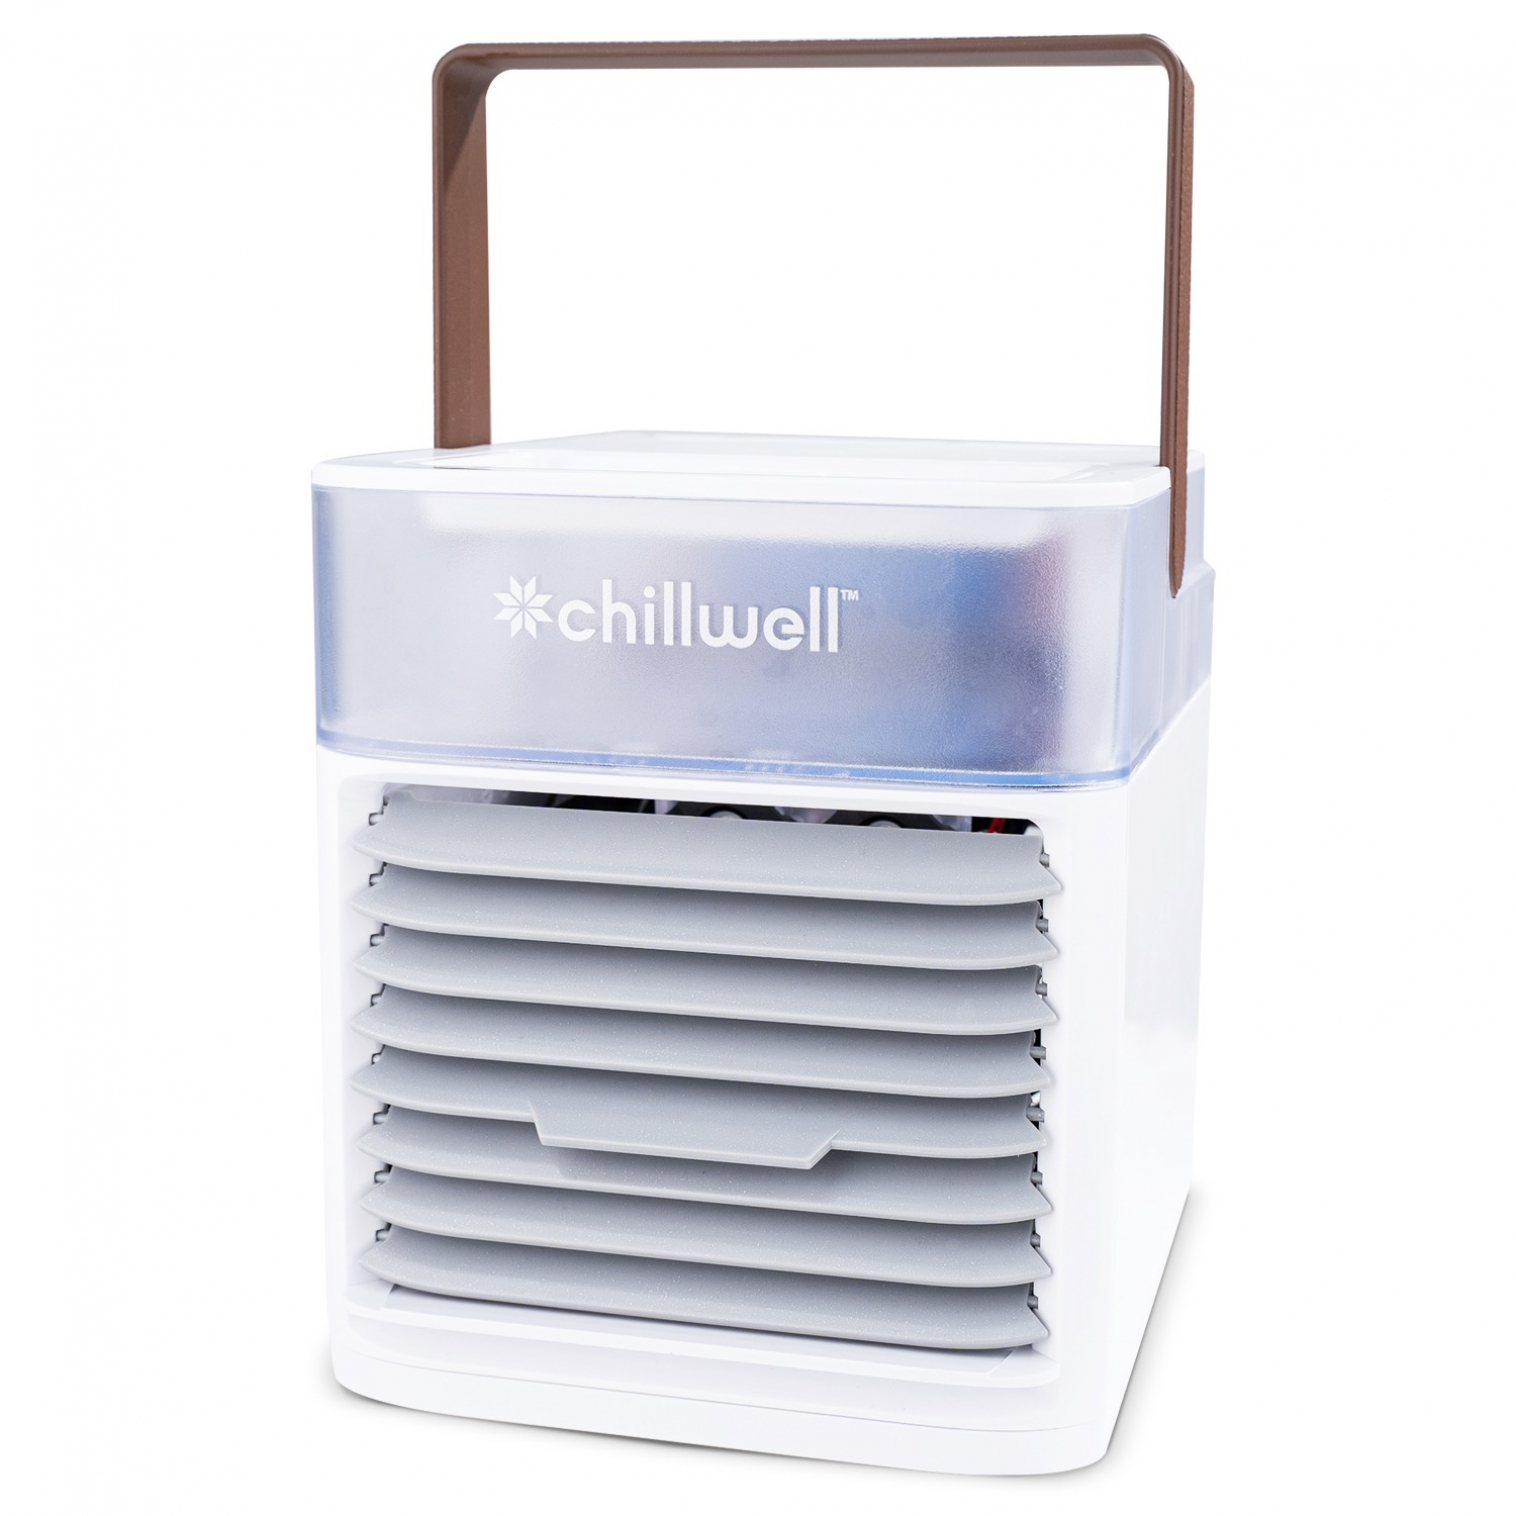 Chillwell AC Air Cooler Review - Why Is Nobody Speaking About This ...